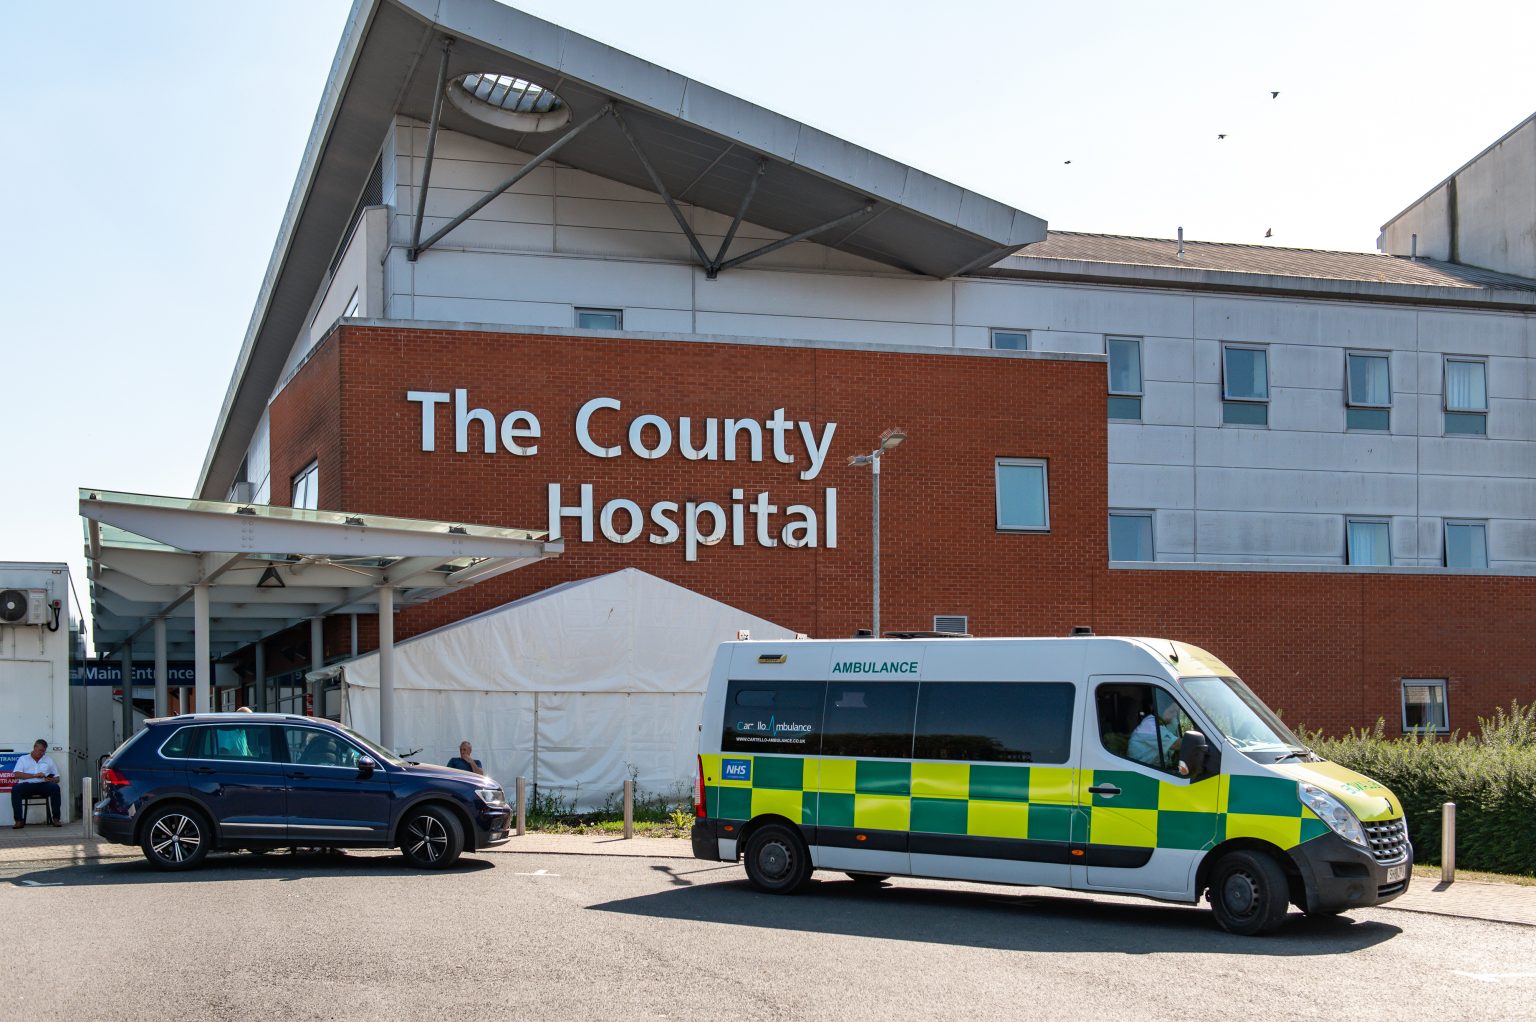 NEWS | A&E at Hereford County Hospital is ‘very busy’ with people asked to consider alternatives